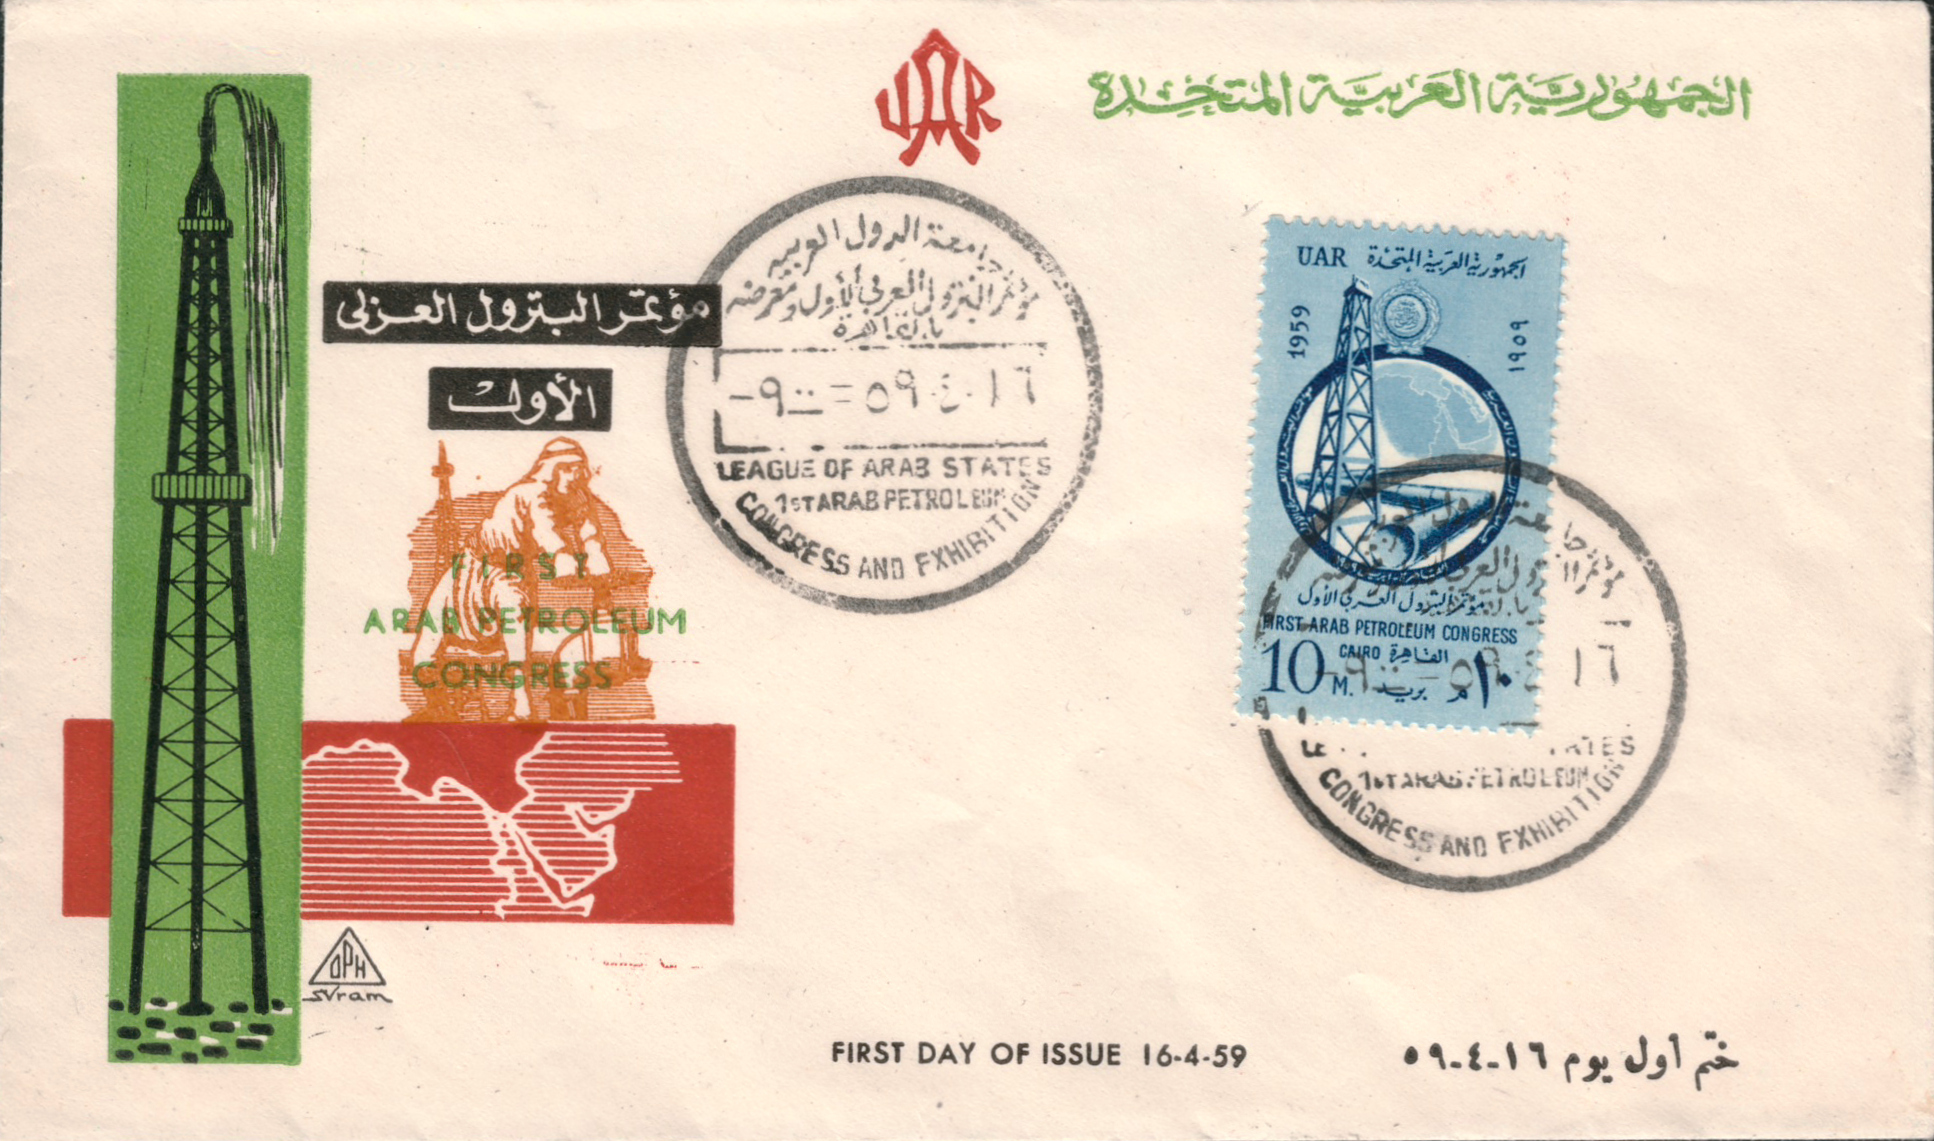 FDC of 1st Arab Petroleum Conference Issue